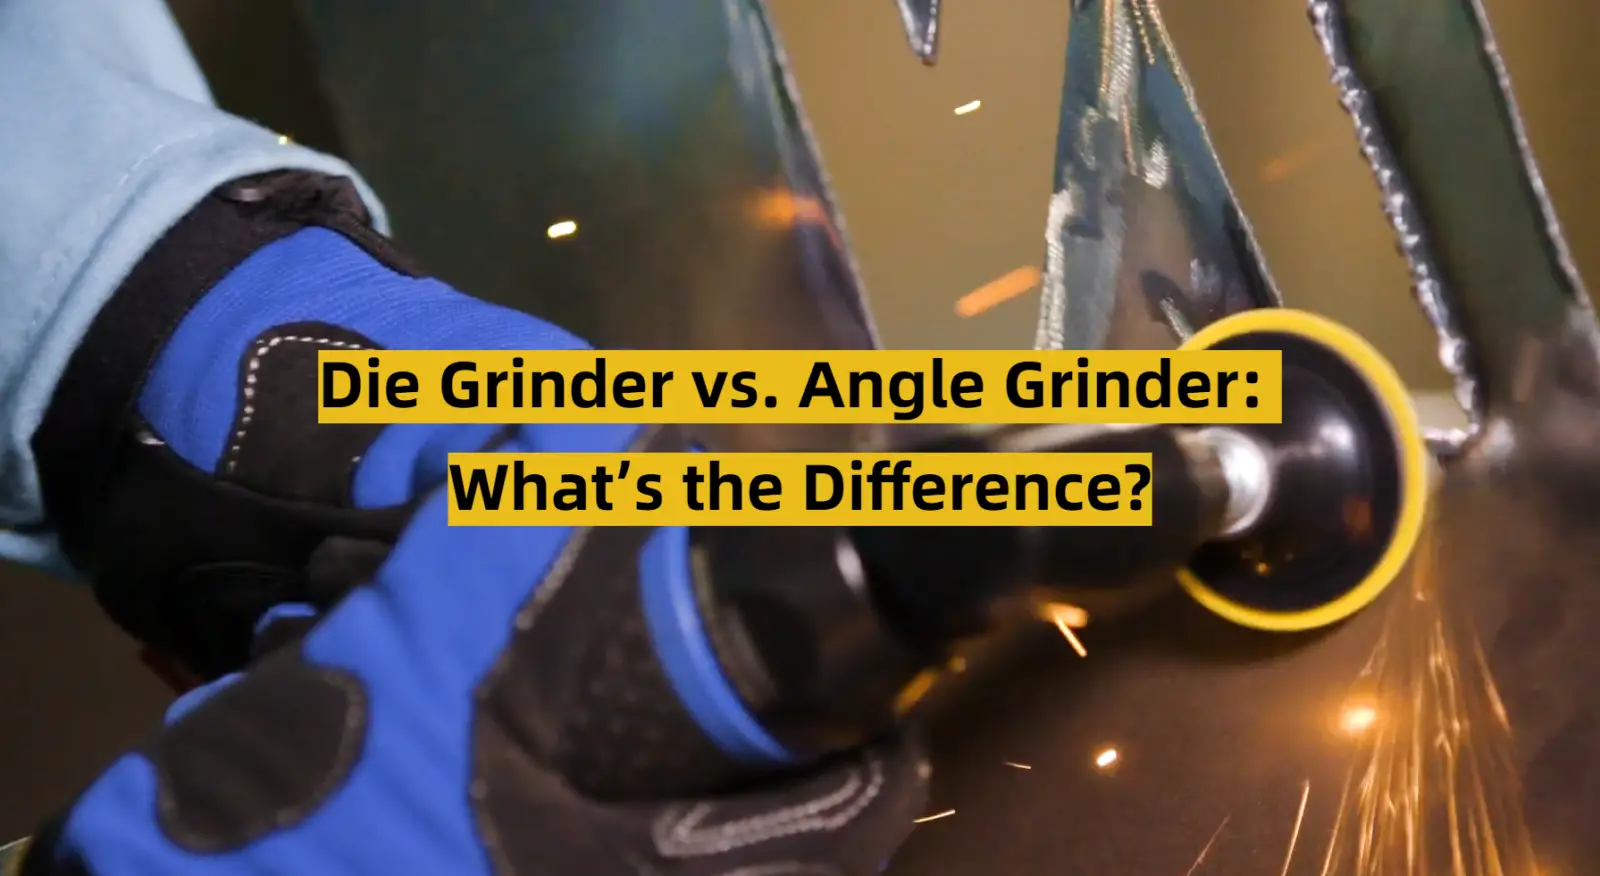 Die Grinder vs. Angle Grinder: What’s the Difference?